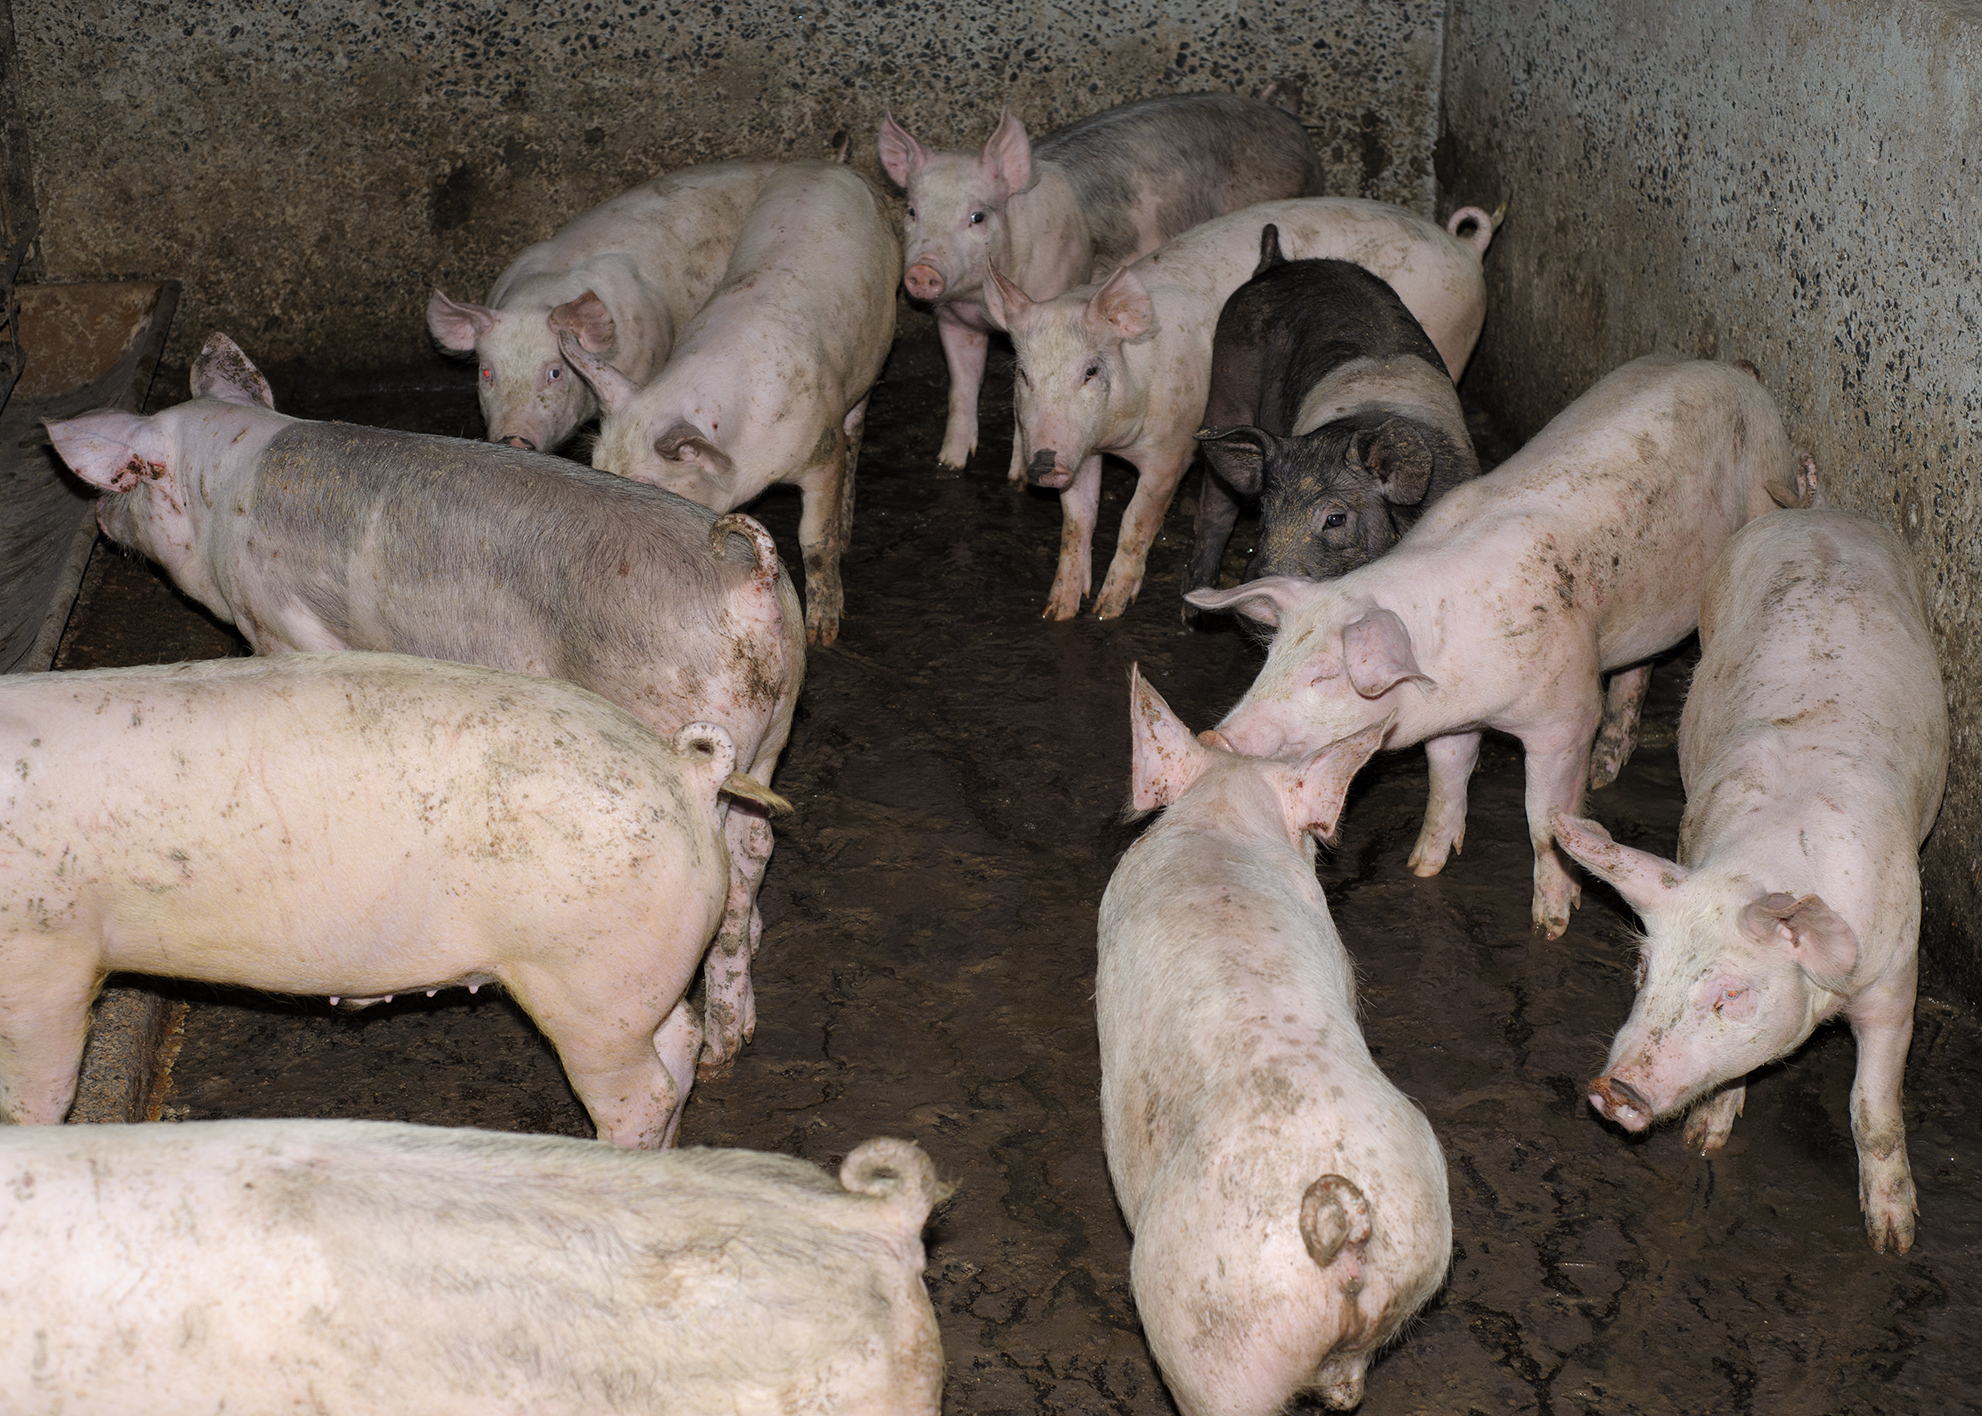 a group of pigs in a dirt pen